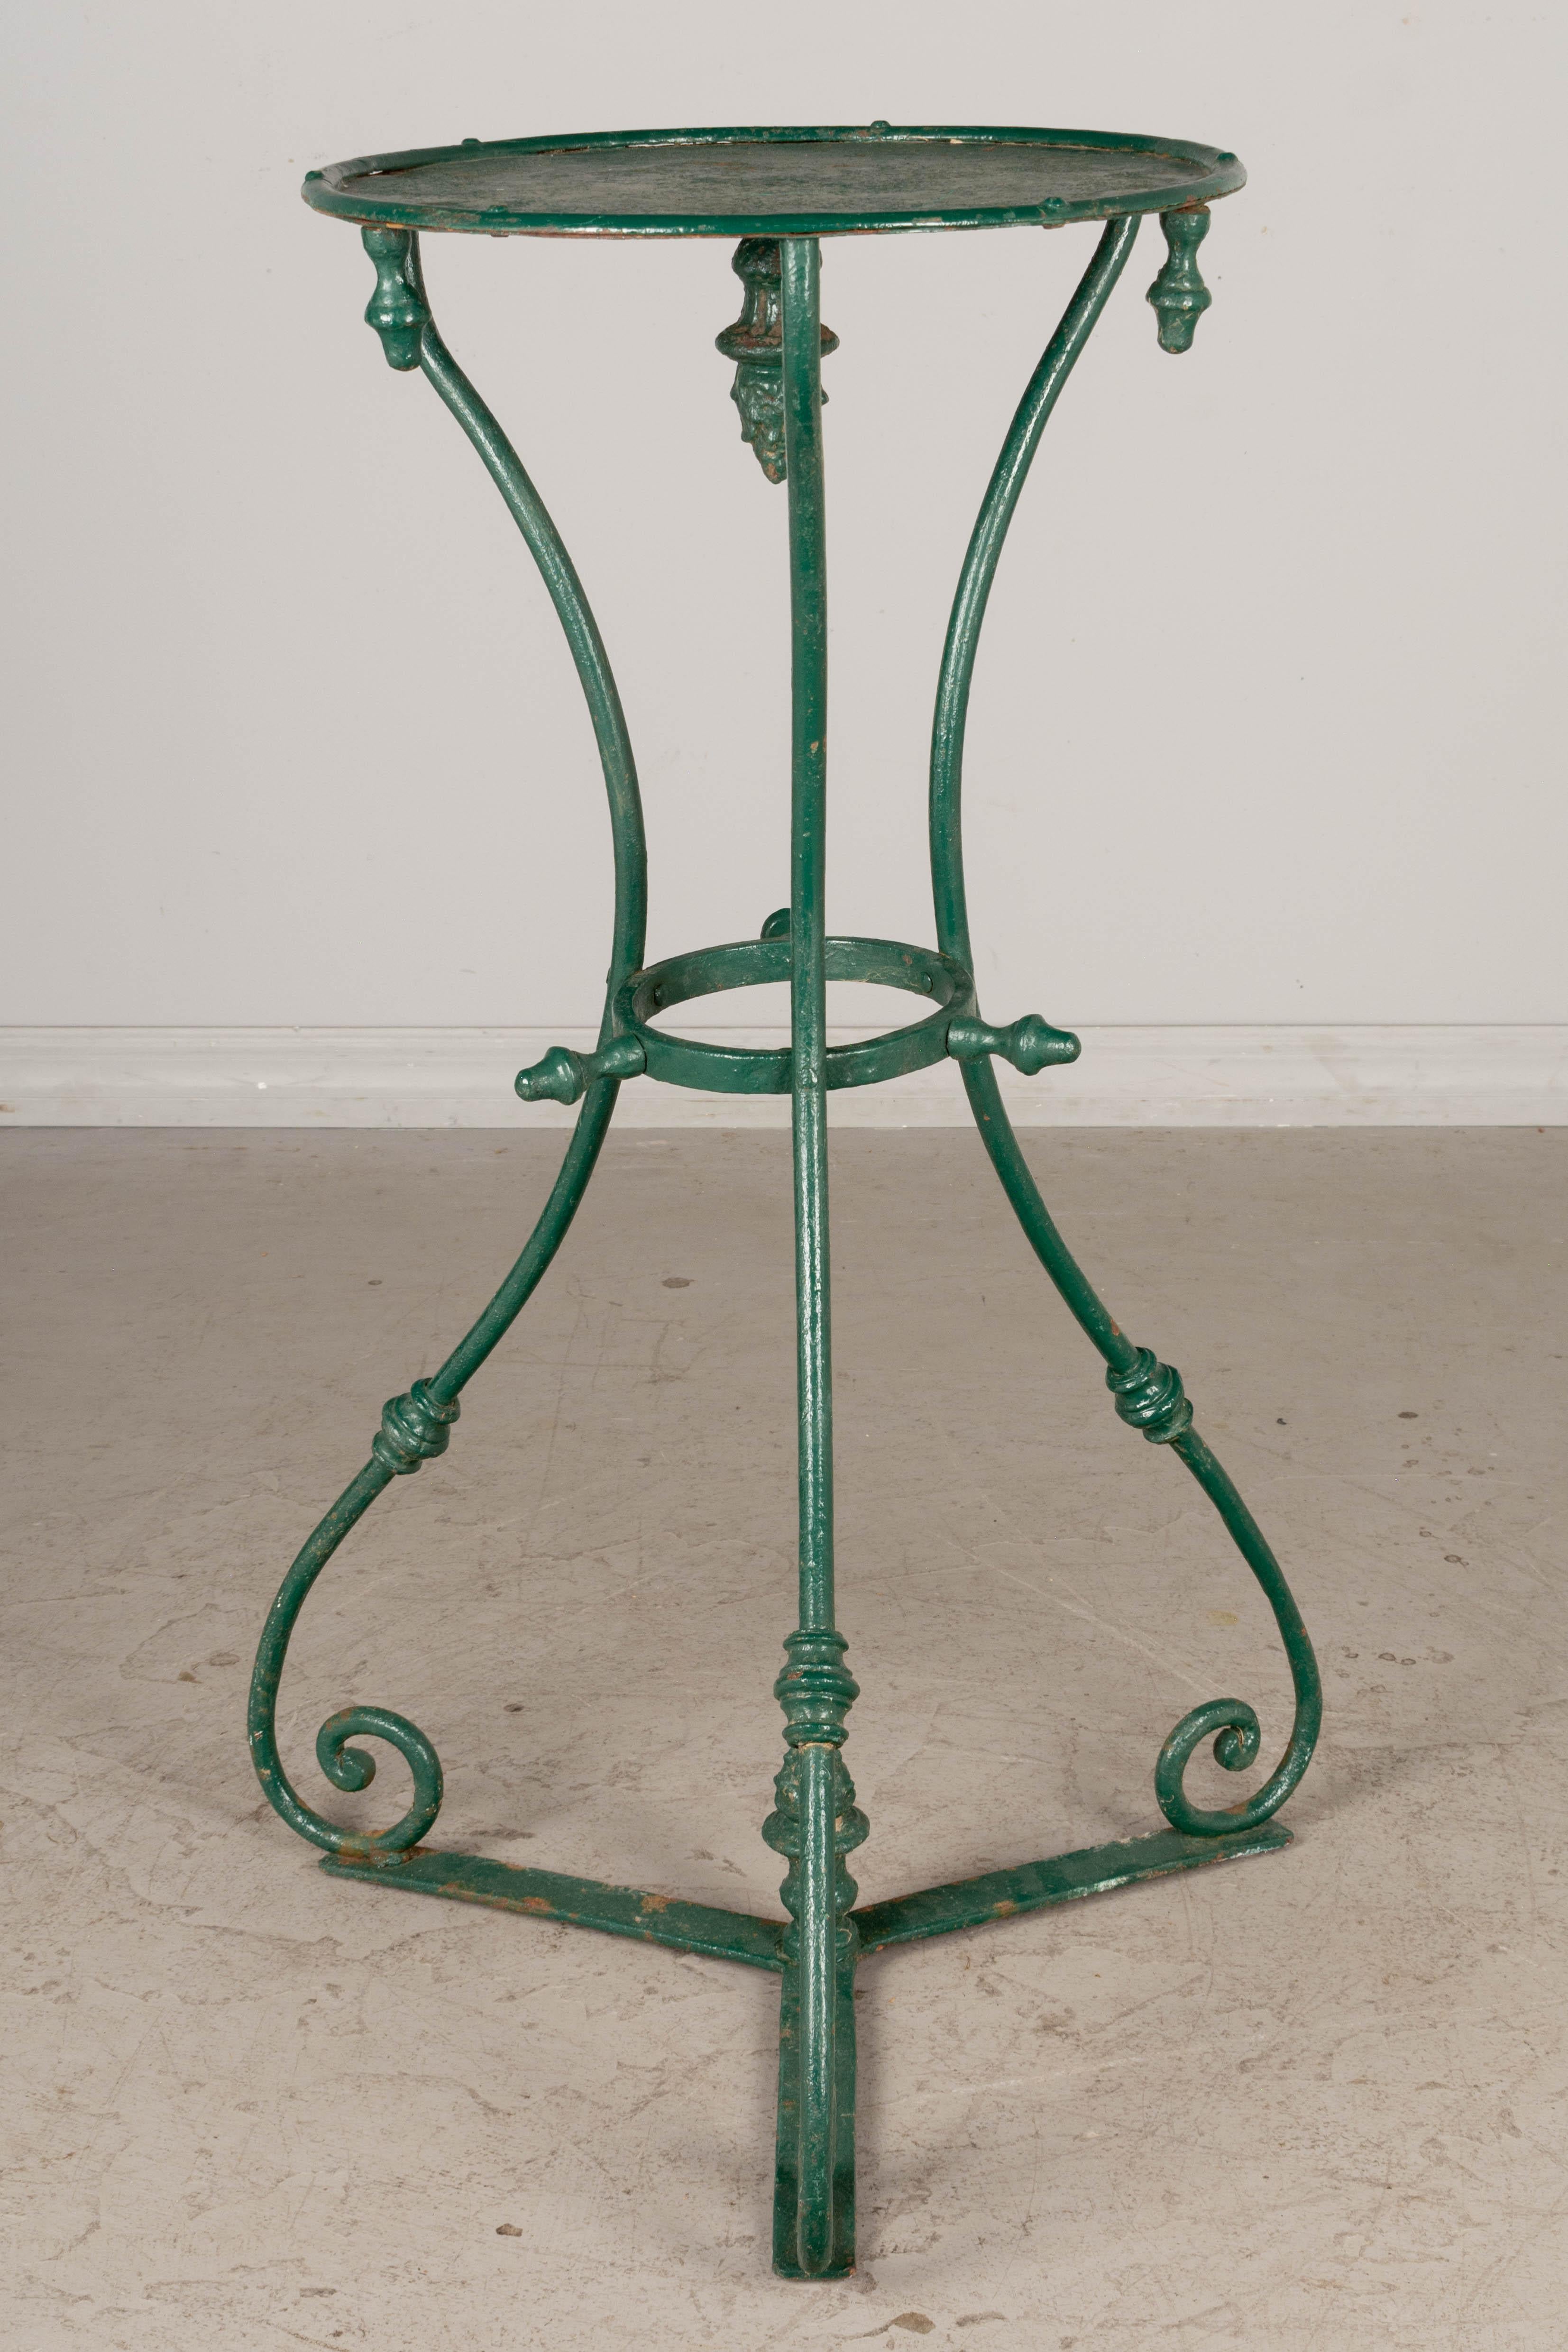 19th Century French Wrought Iron Garden Pedestal In Good Condition For Sale In Winter Park, FL